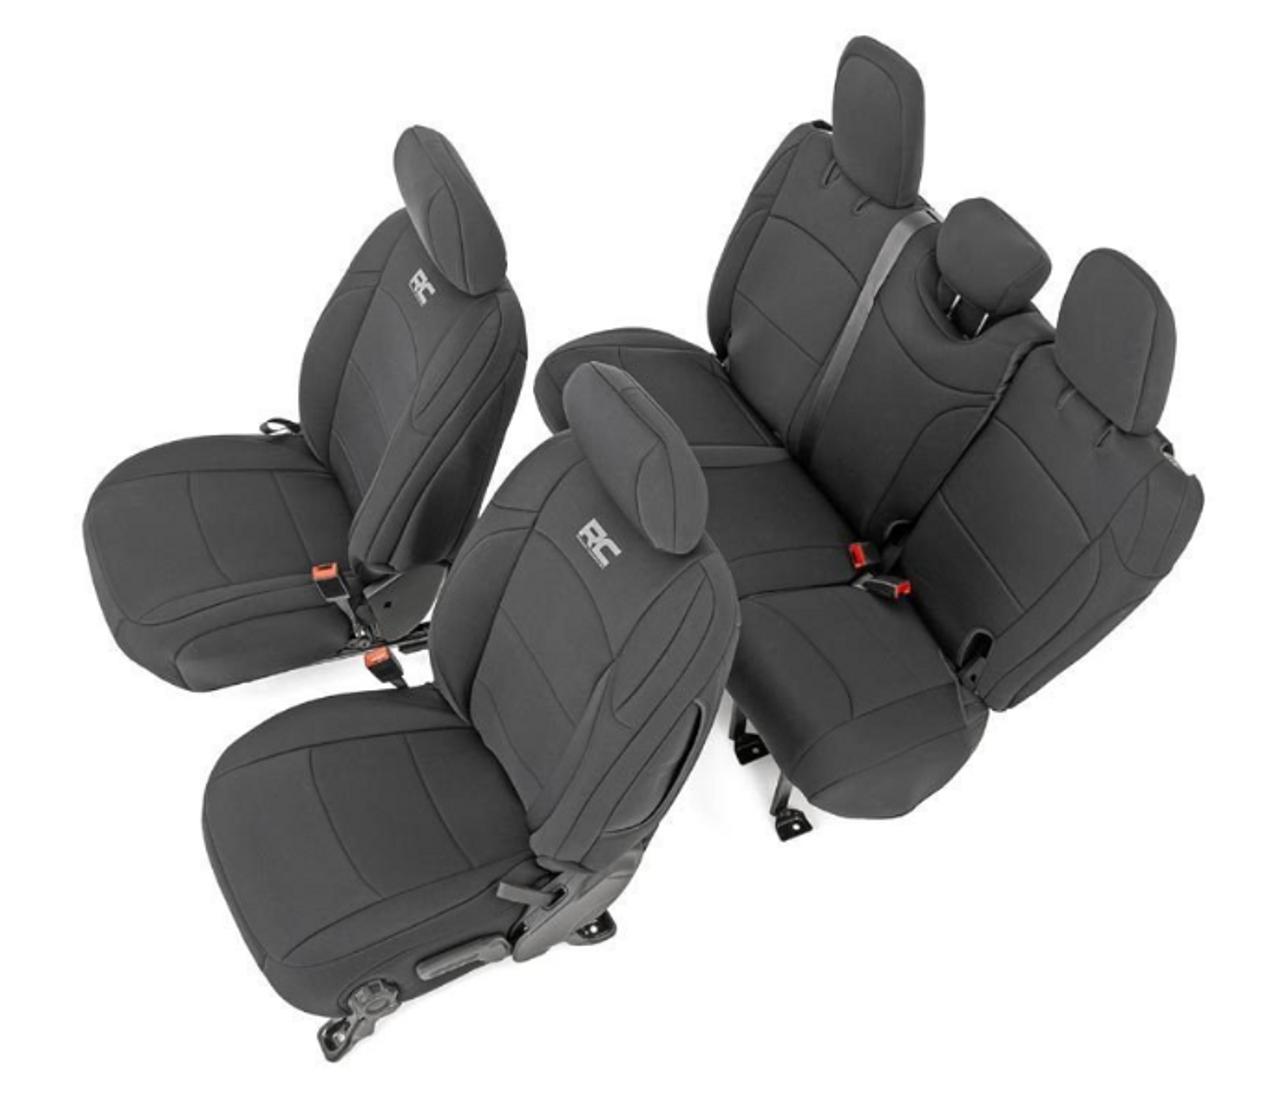 Rough Country 91010 Front & Rear Seat Covers Without Arm Rest for Jeep Wrangler JL 4 Door 2018+